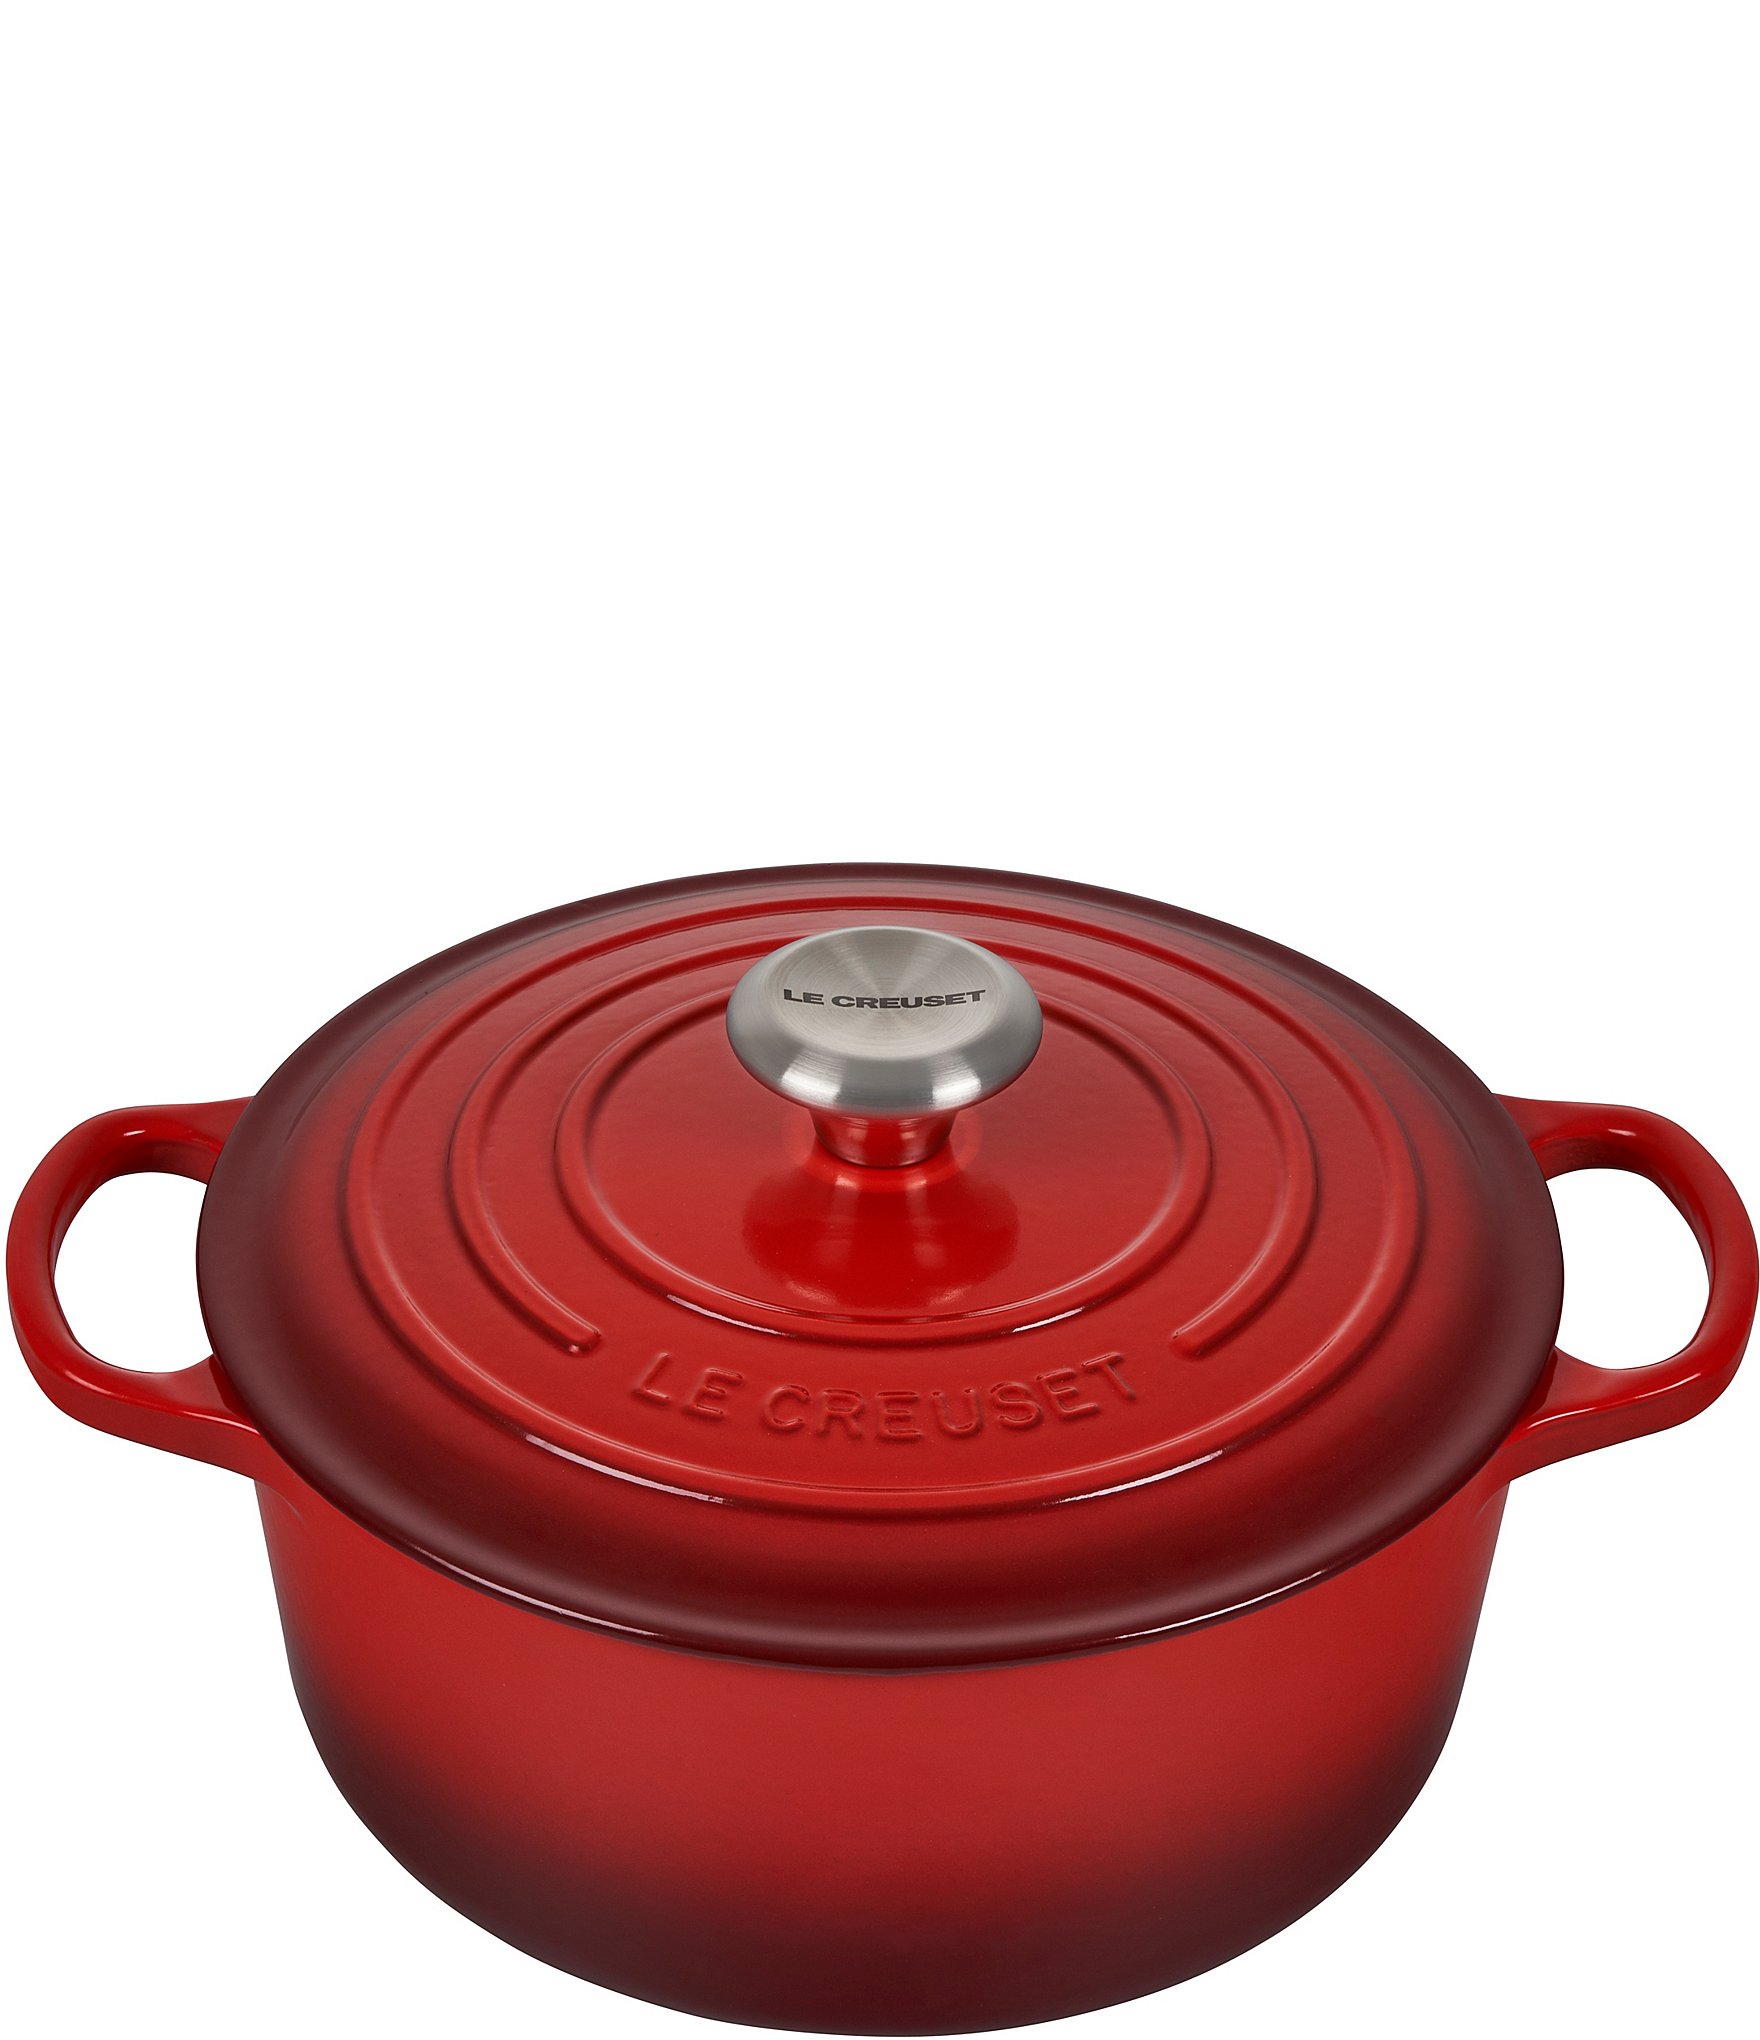 https://dimg.dillards.com/is/image/DillardsZoom/zoom/le-creuset-7.5-qt-round-enameled-cast-iron-dutch-oven-with-stainless-steel-knobs/00000000_zi_c8c10a55-fa0f-454d-ba48-775b3dfbae61.jpg